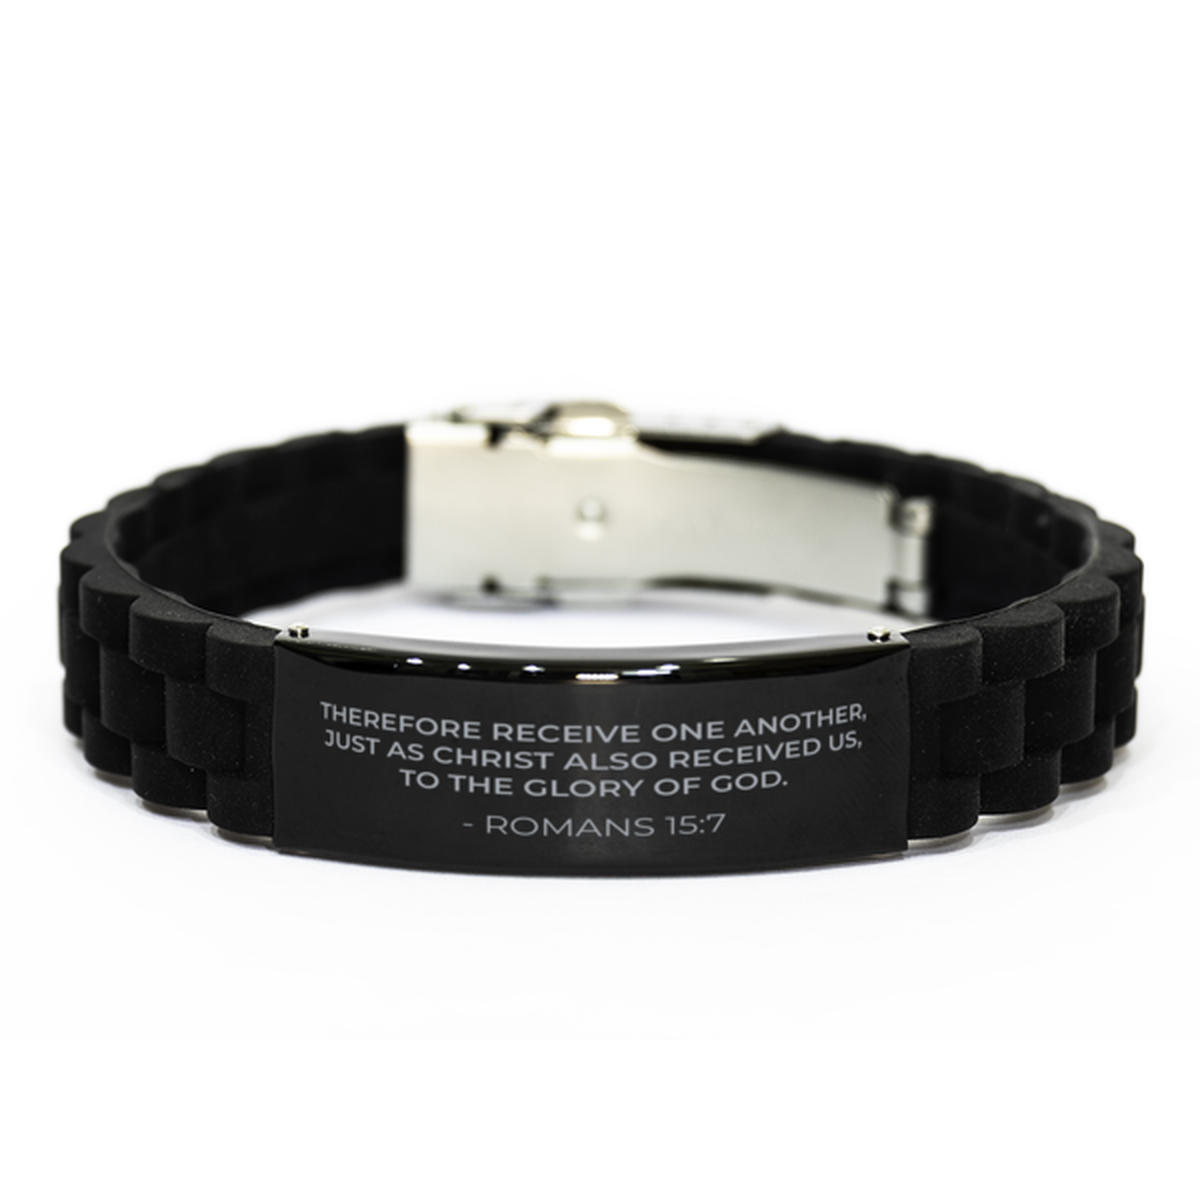 Bible Verse Black Bracelet,, Romans 15:7 Therefore Receive One Another, Just As Christ, Inspirational Christian Gifts For Men Women